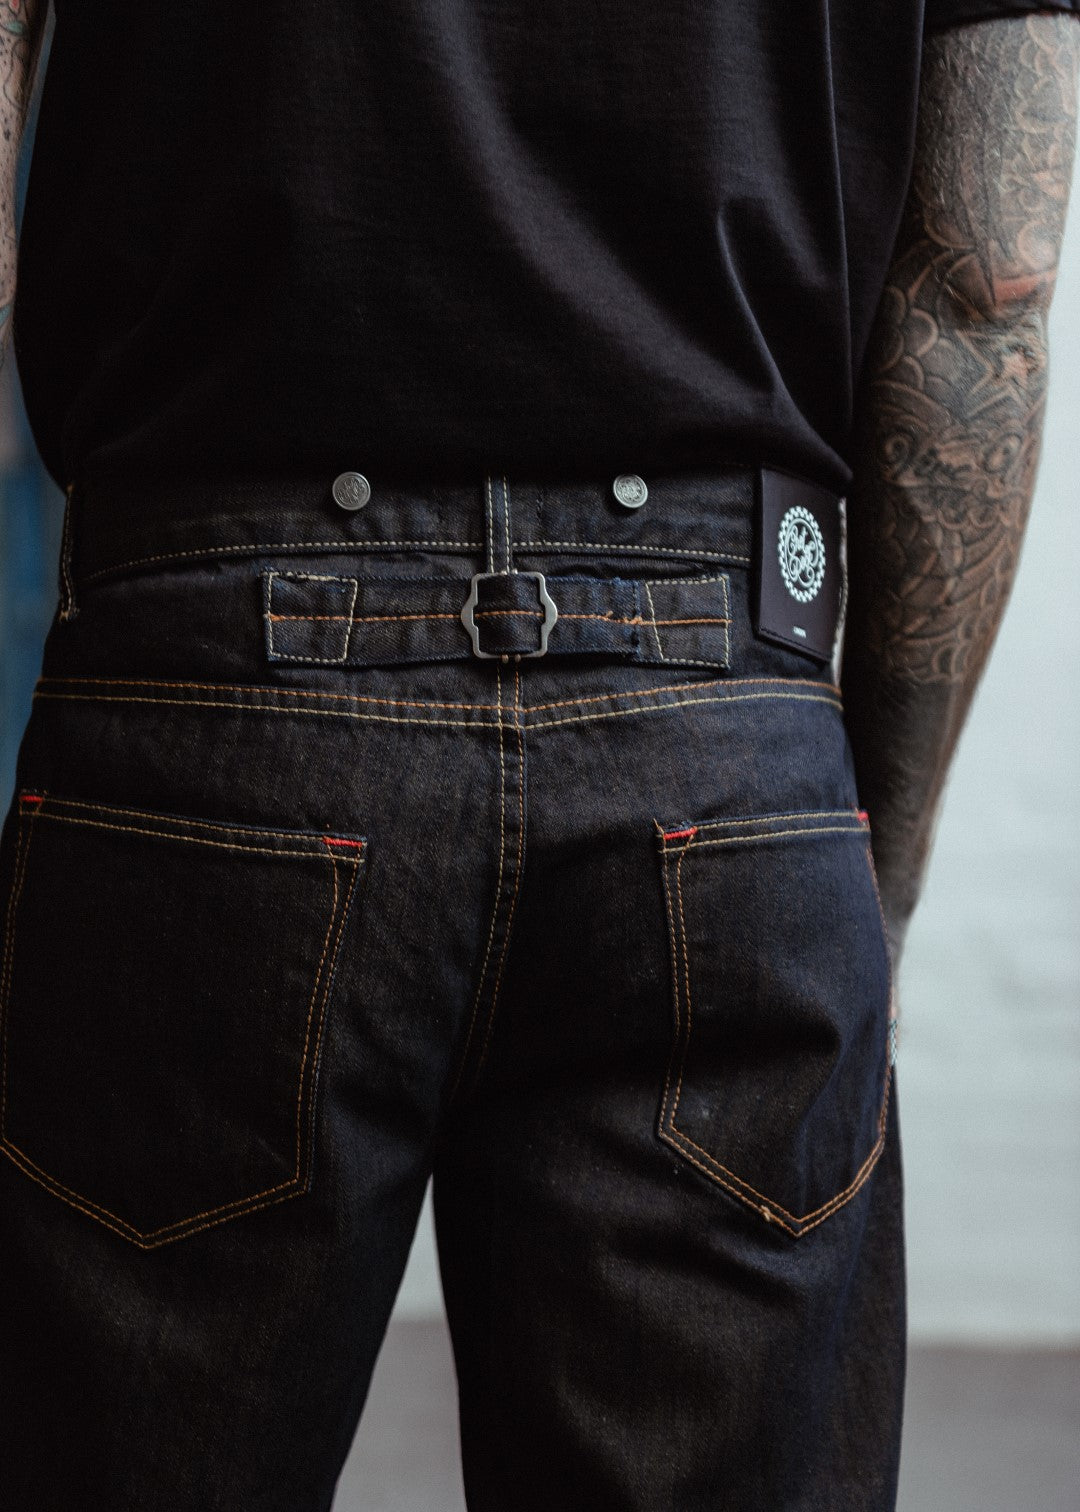 Loose Larry Jeans in Black or Navy by Chet Rock